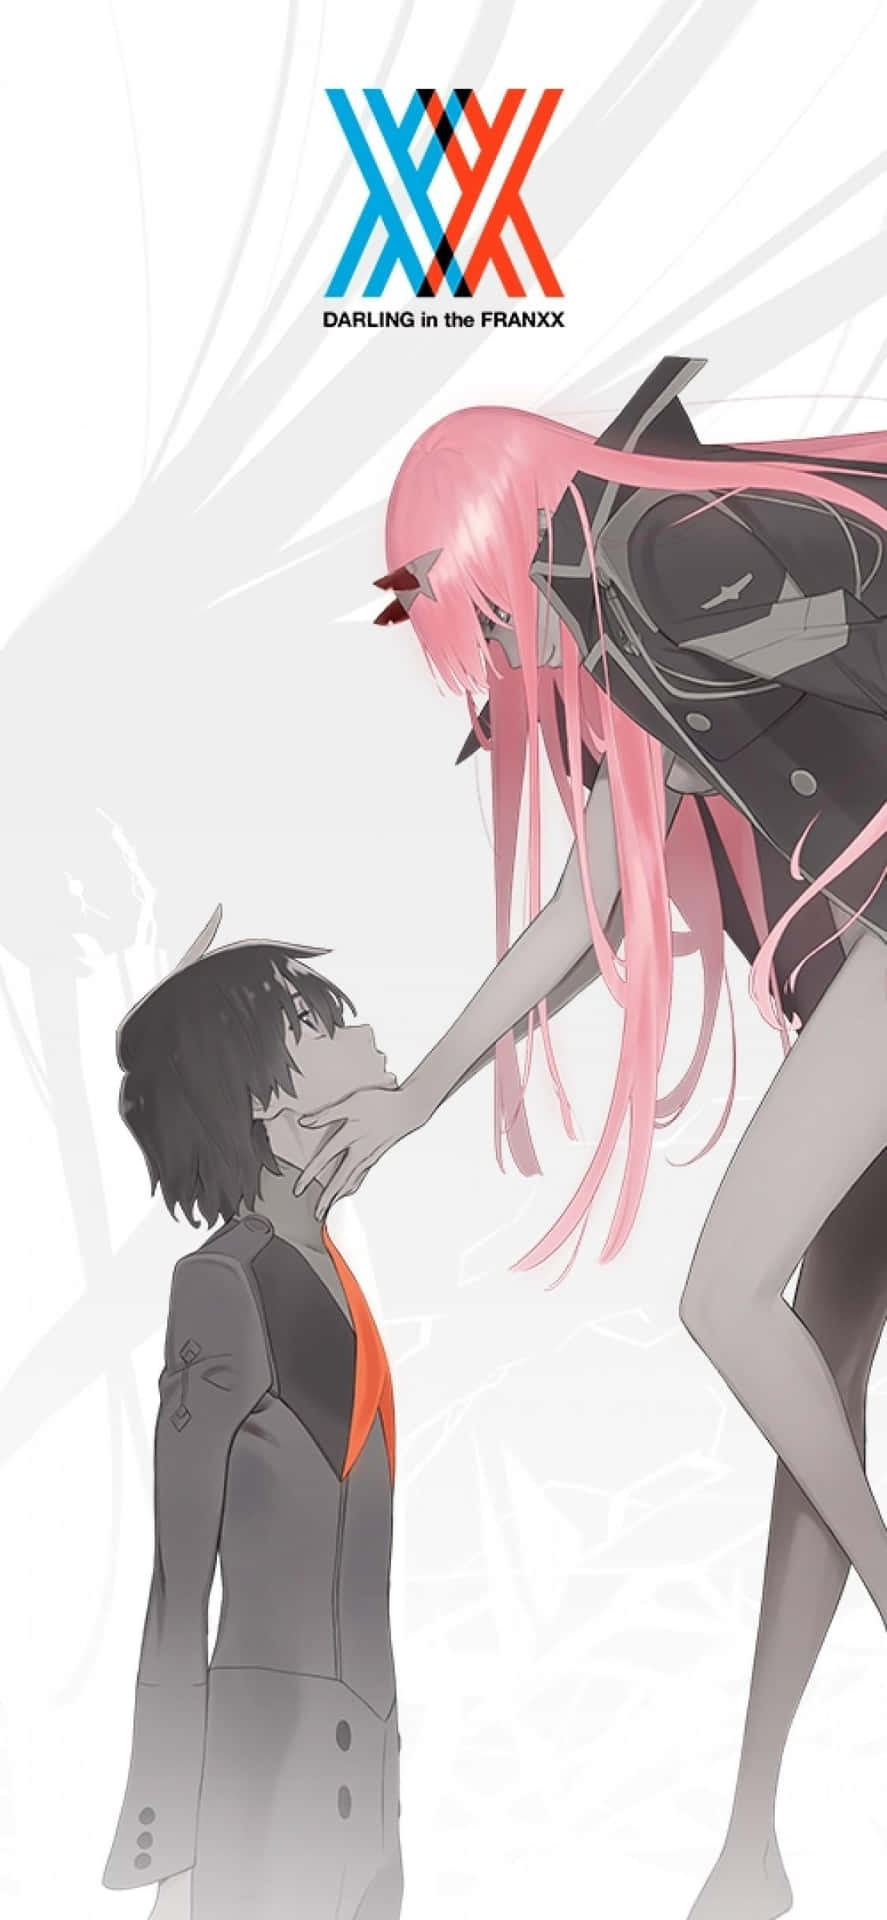 JU-Hachi and Zero-Two on a mission with the Darling in the Franxx Phone Wallpaper